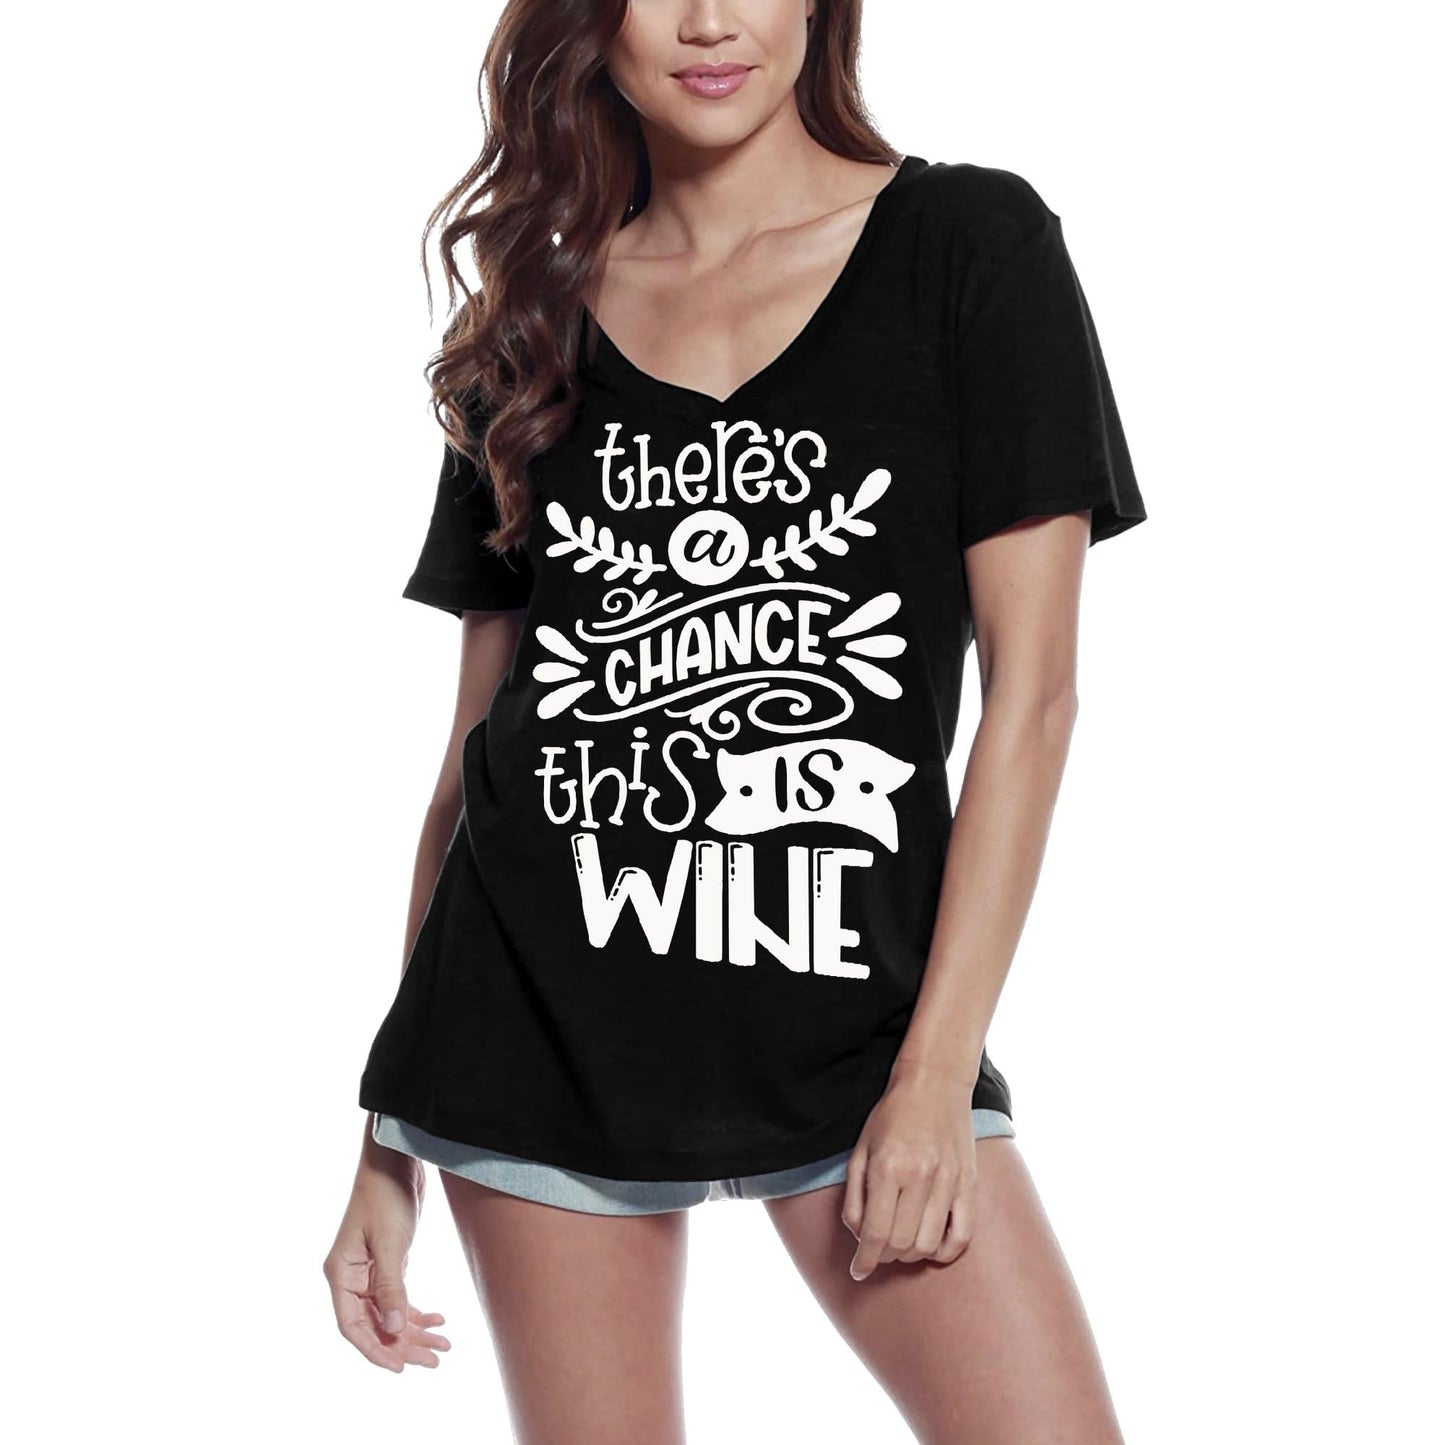 ULTRABASIC Women's T-Shirt There's a Chance This is Wine - Short Sleeve Tee Shirt Tops